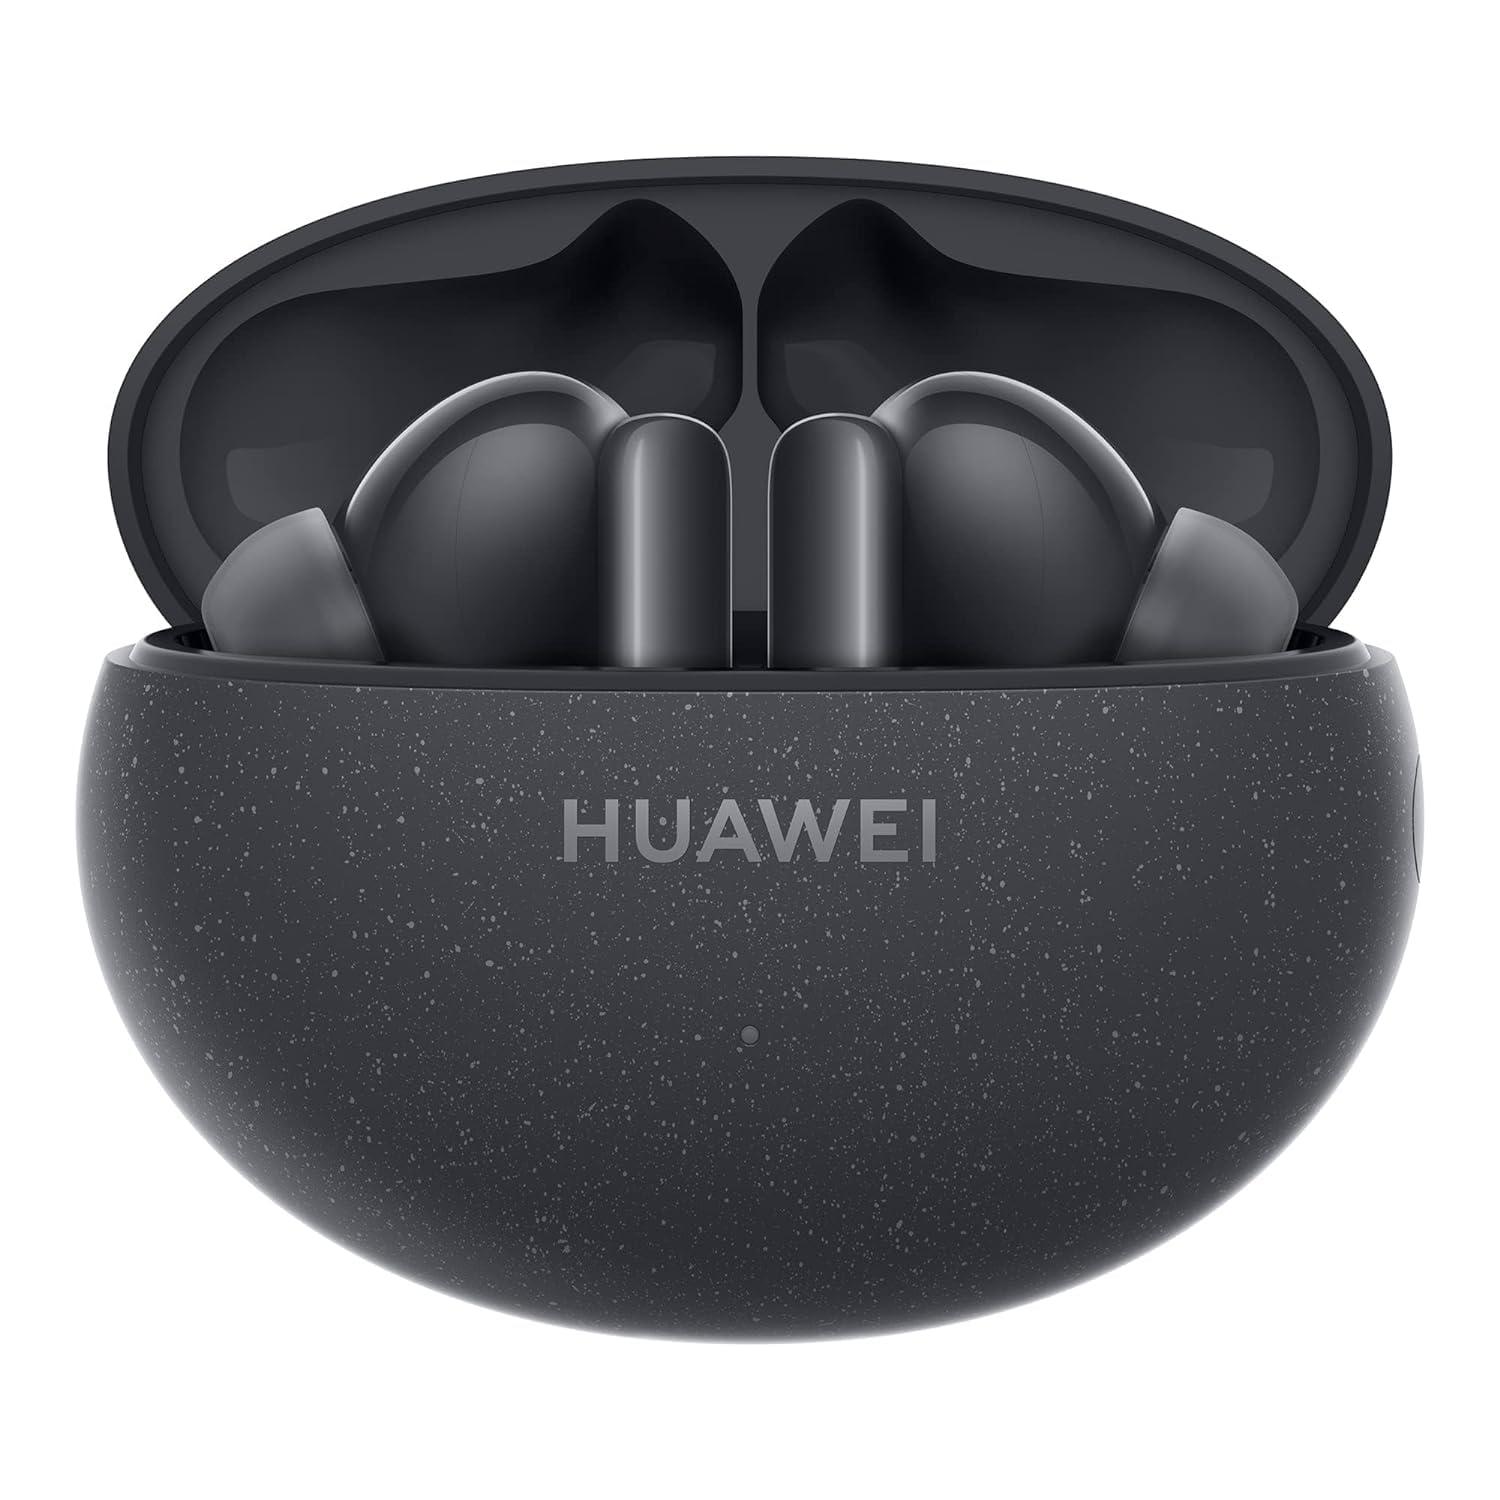 huawei freebuds 5i wireless earbuds - noise cancelling earphones with long lasting battery life - bluetooth and water resista